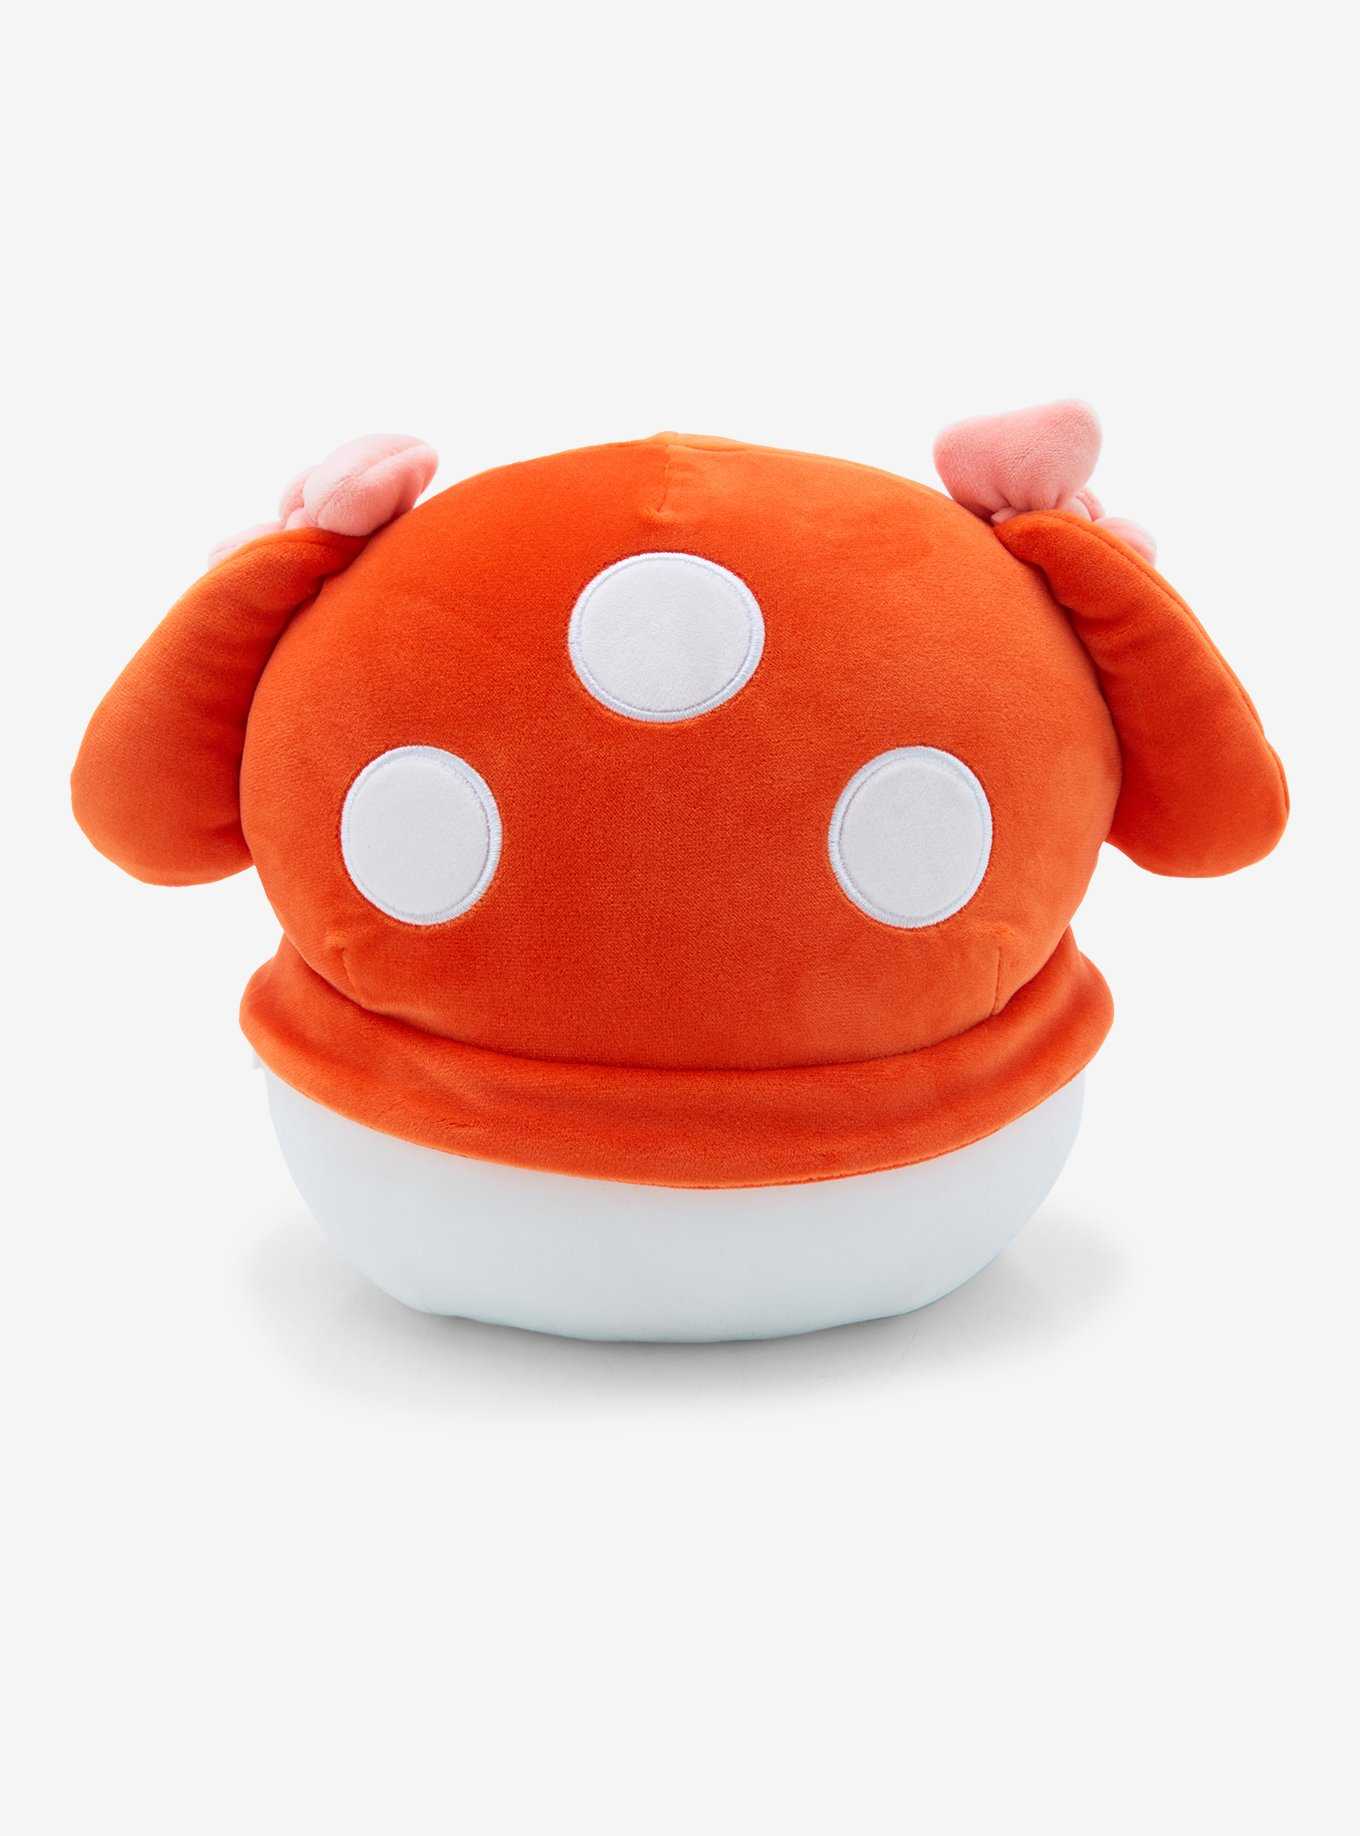 Squishmallows My Melody Mushroom Plush Hot Topic Exclusive, , hi-res